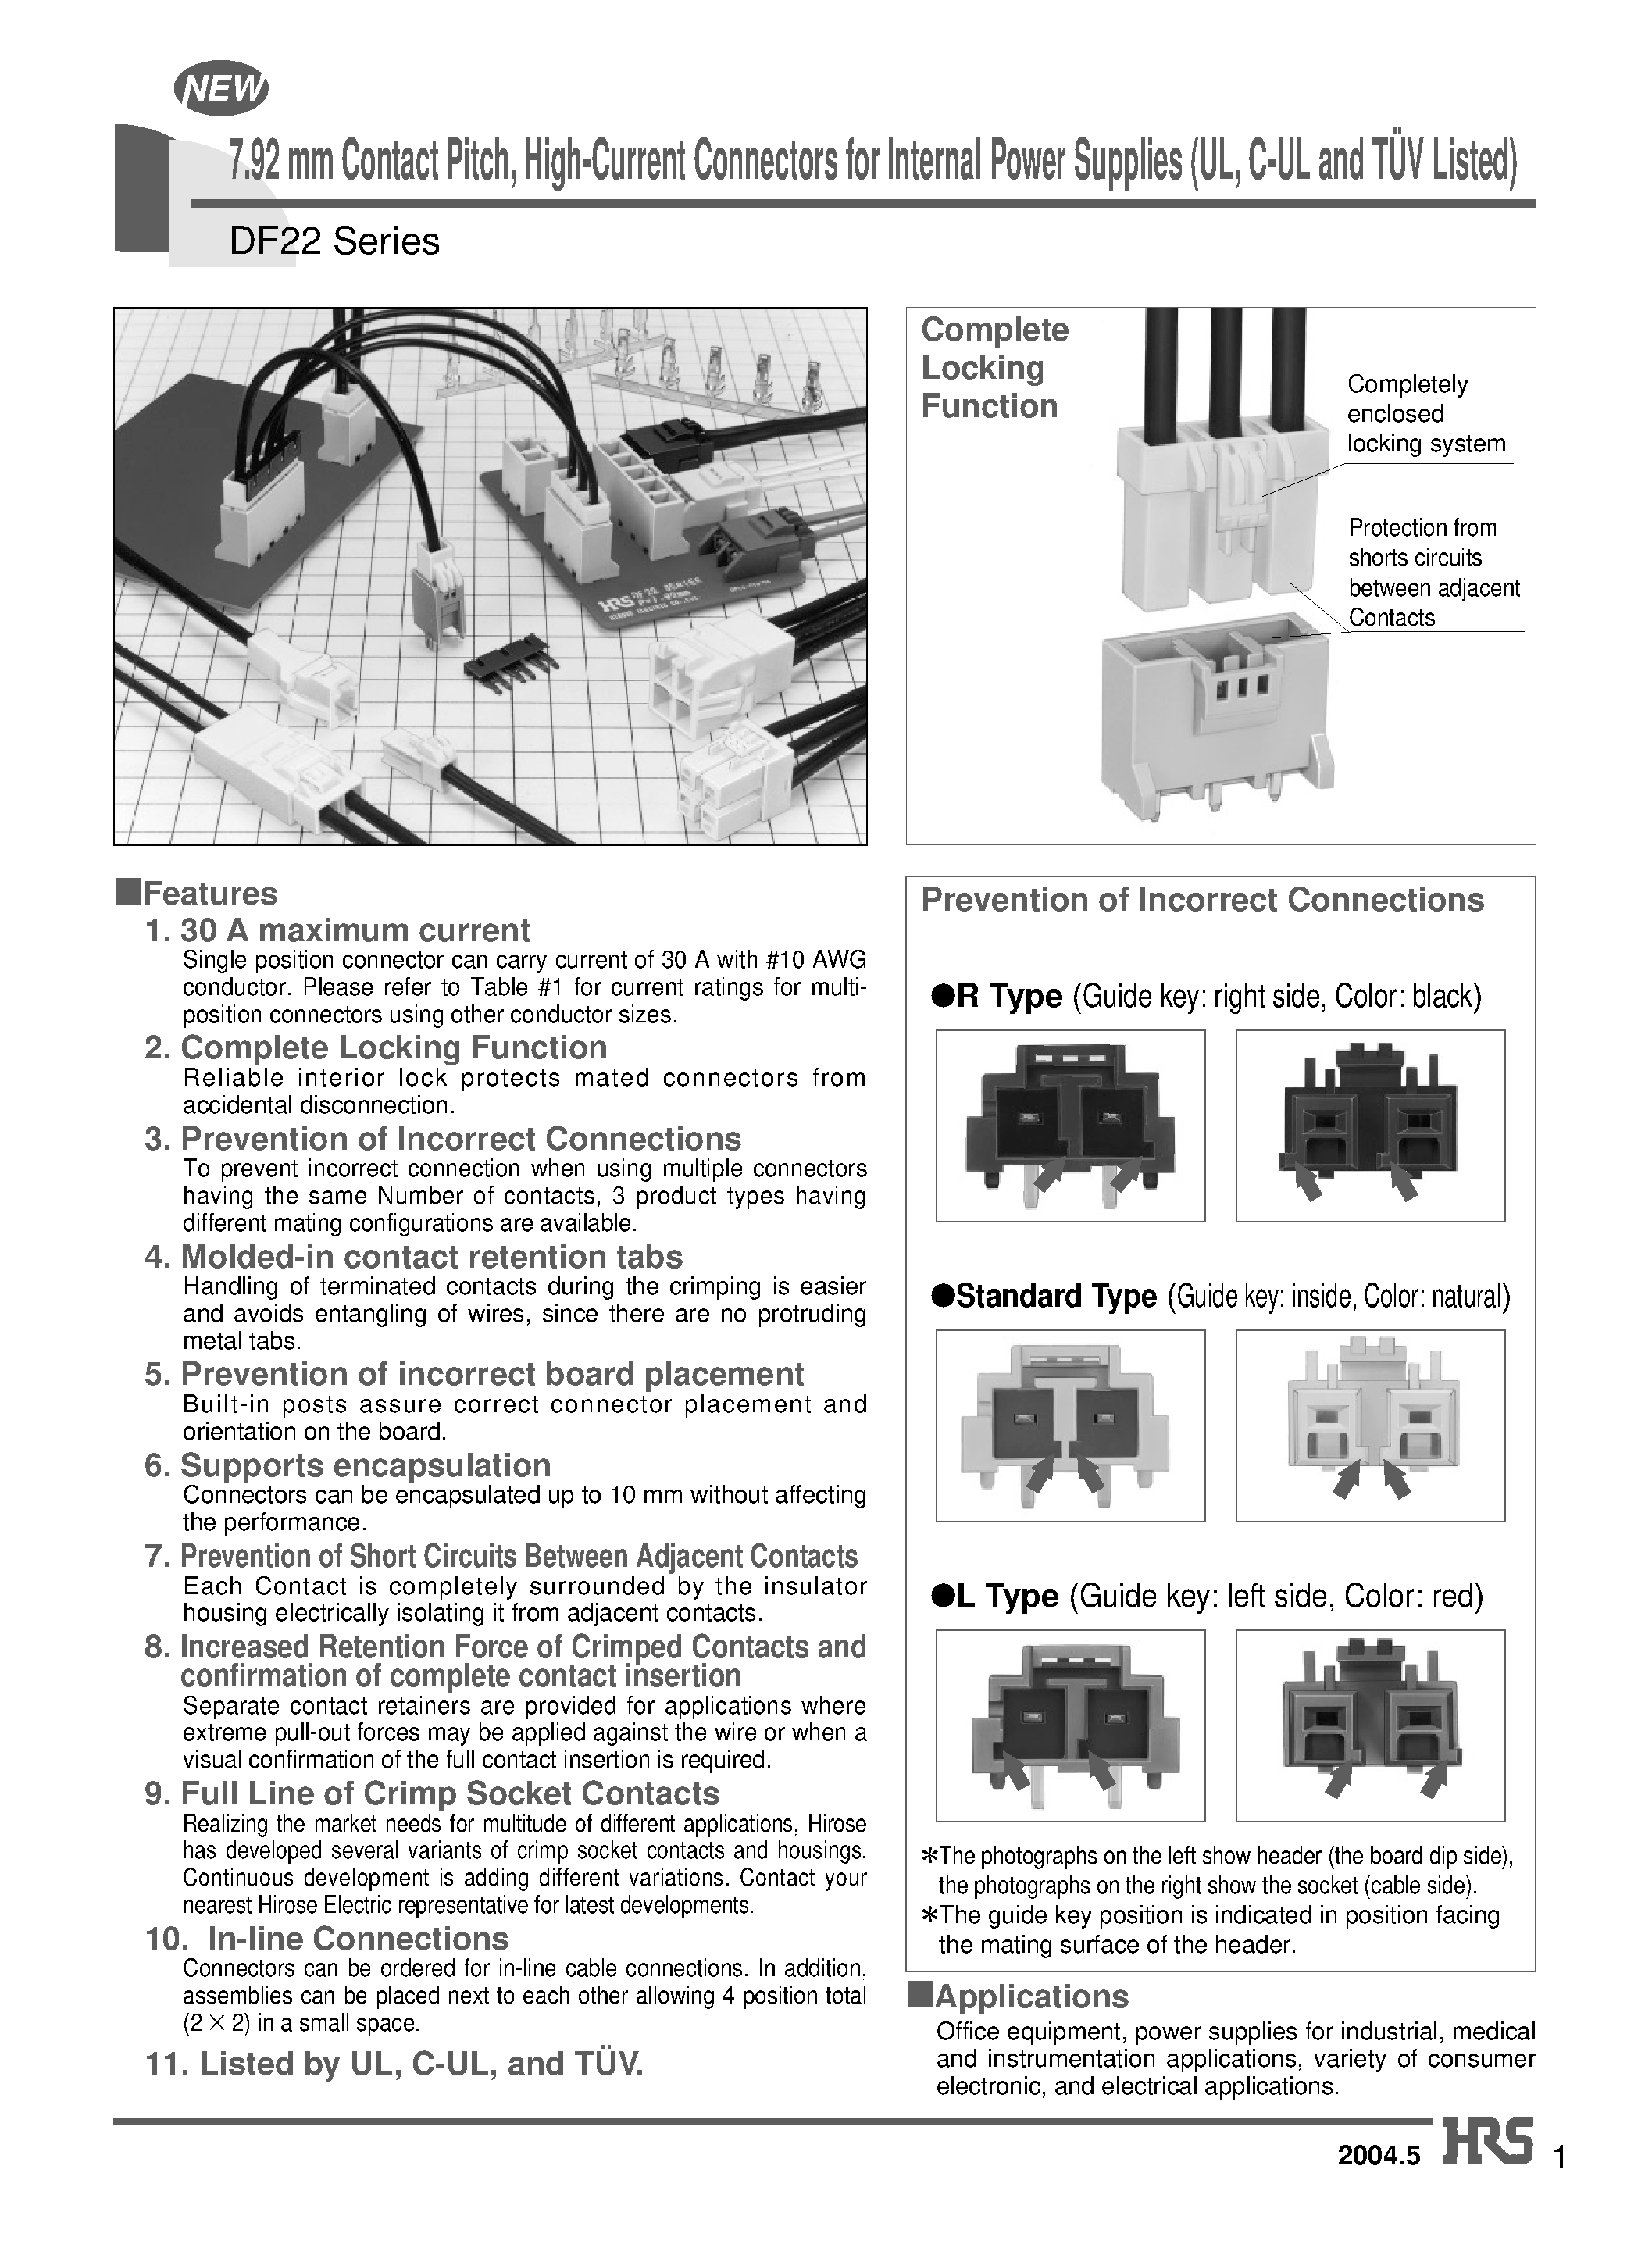 Даташит DF22B-1P-7.92C - 7.92 mm Contact Pitch/ High-Current Connectors for Internal Power Supplies (UL/ C-UL and TUV Listed) страница 1